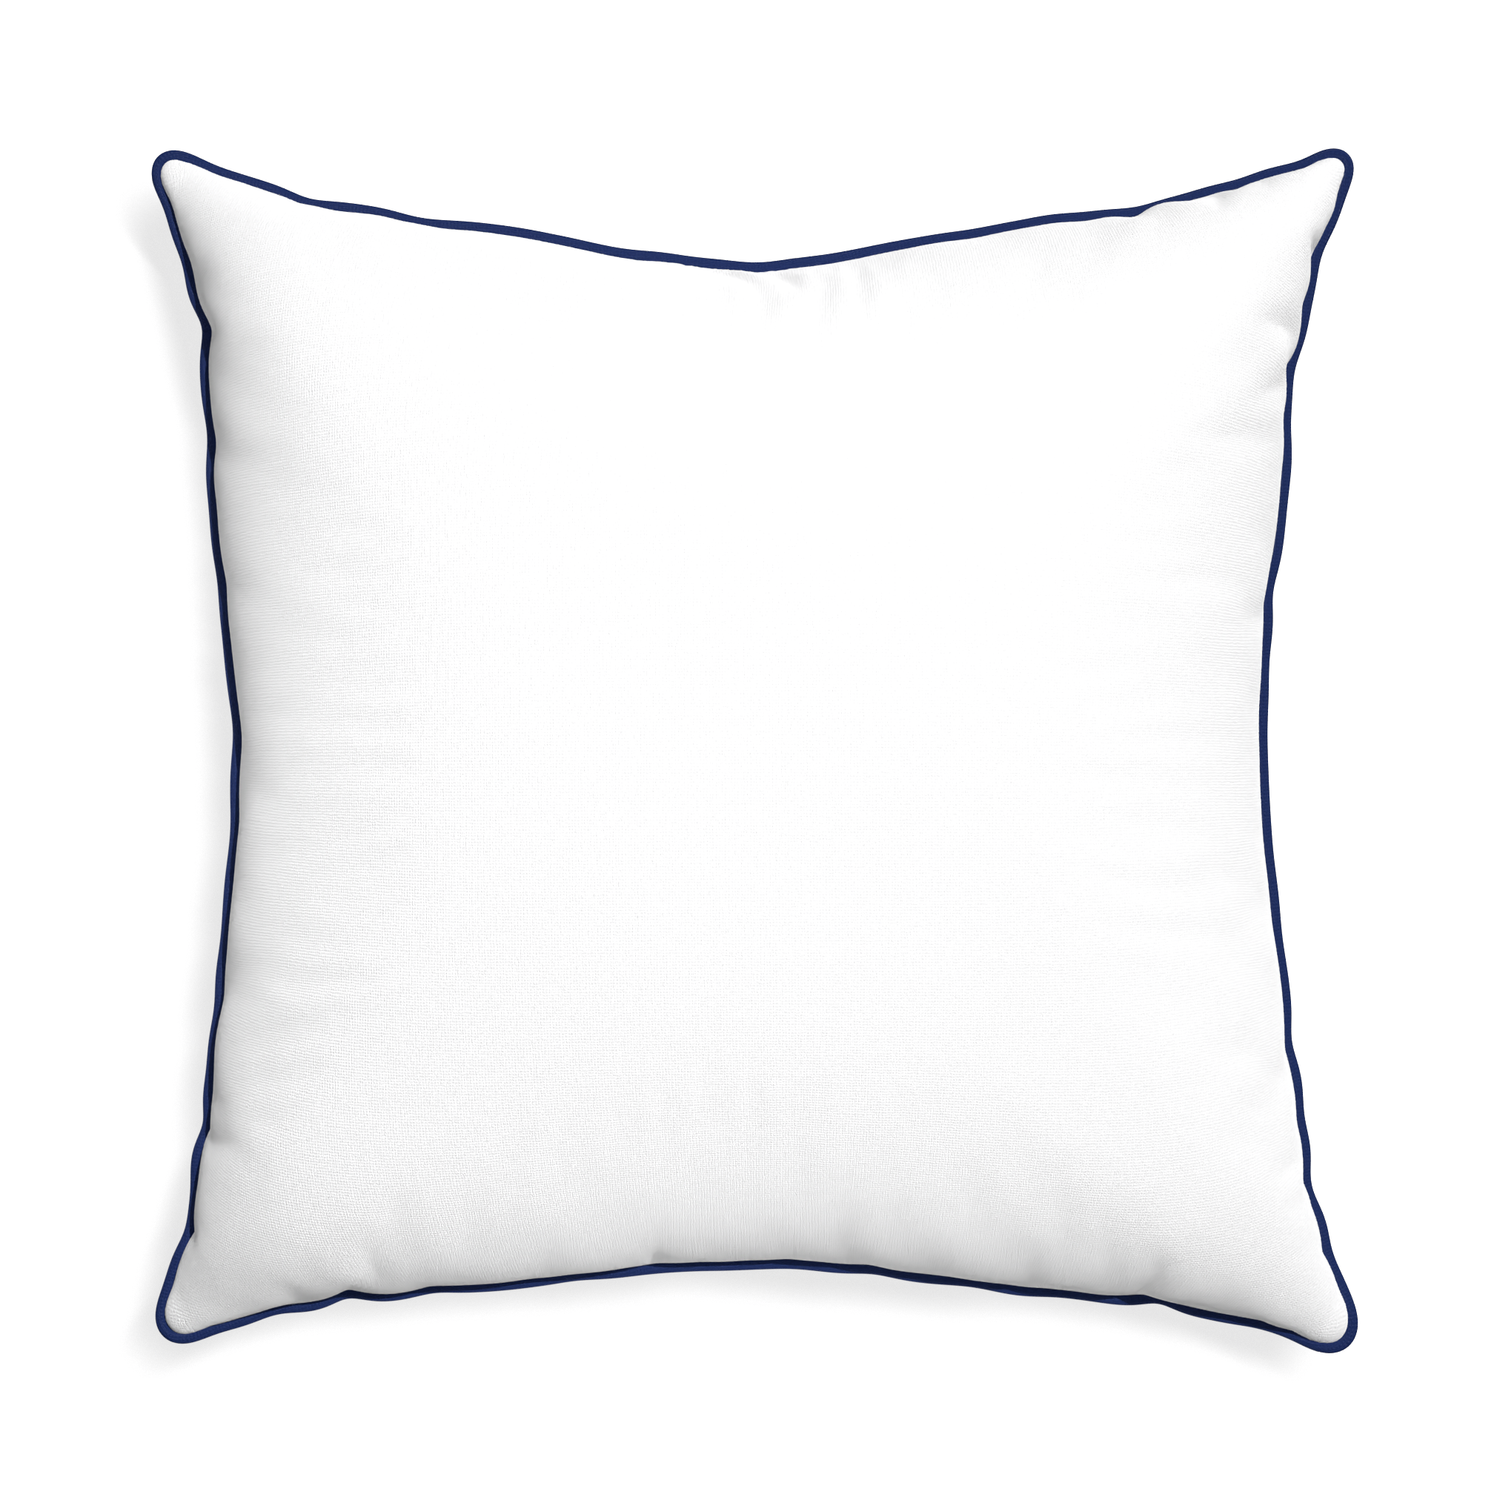 Euro-sham snow custom white cottonpillow with midnight piping on white background